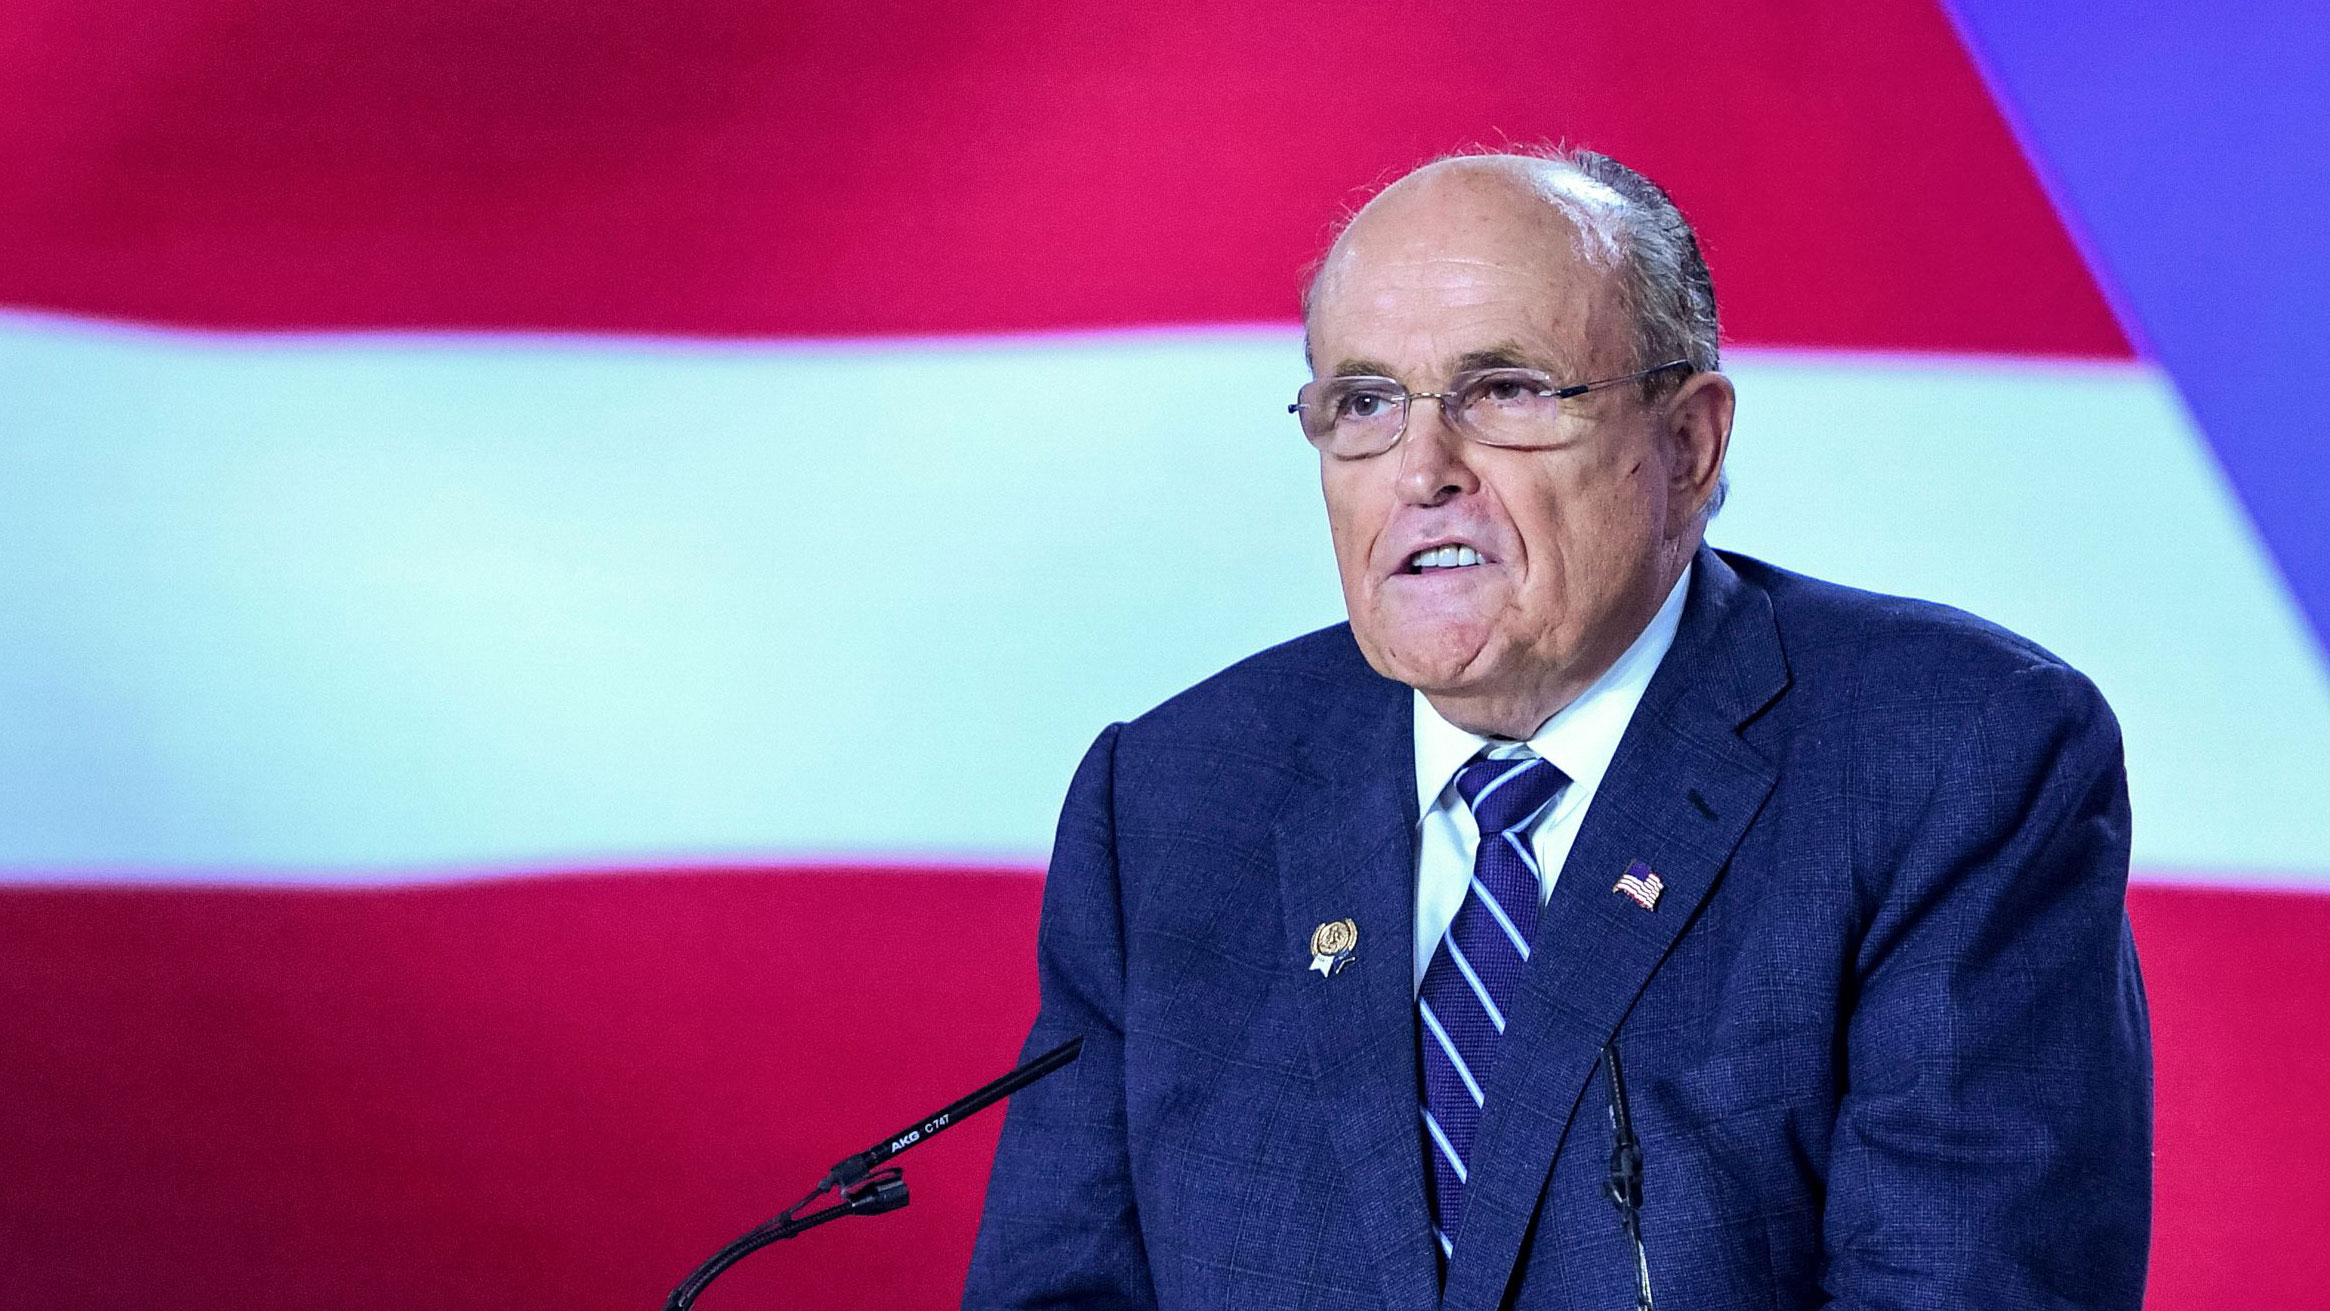 Former Mayor of New York City Rudy Giuliani speaking in the Albanian town of Manza, on July 13, 2019. 